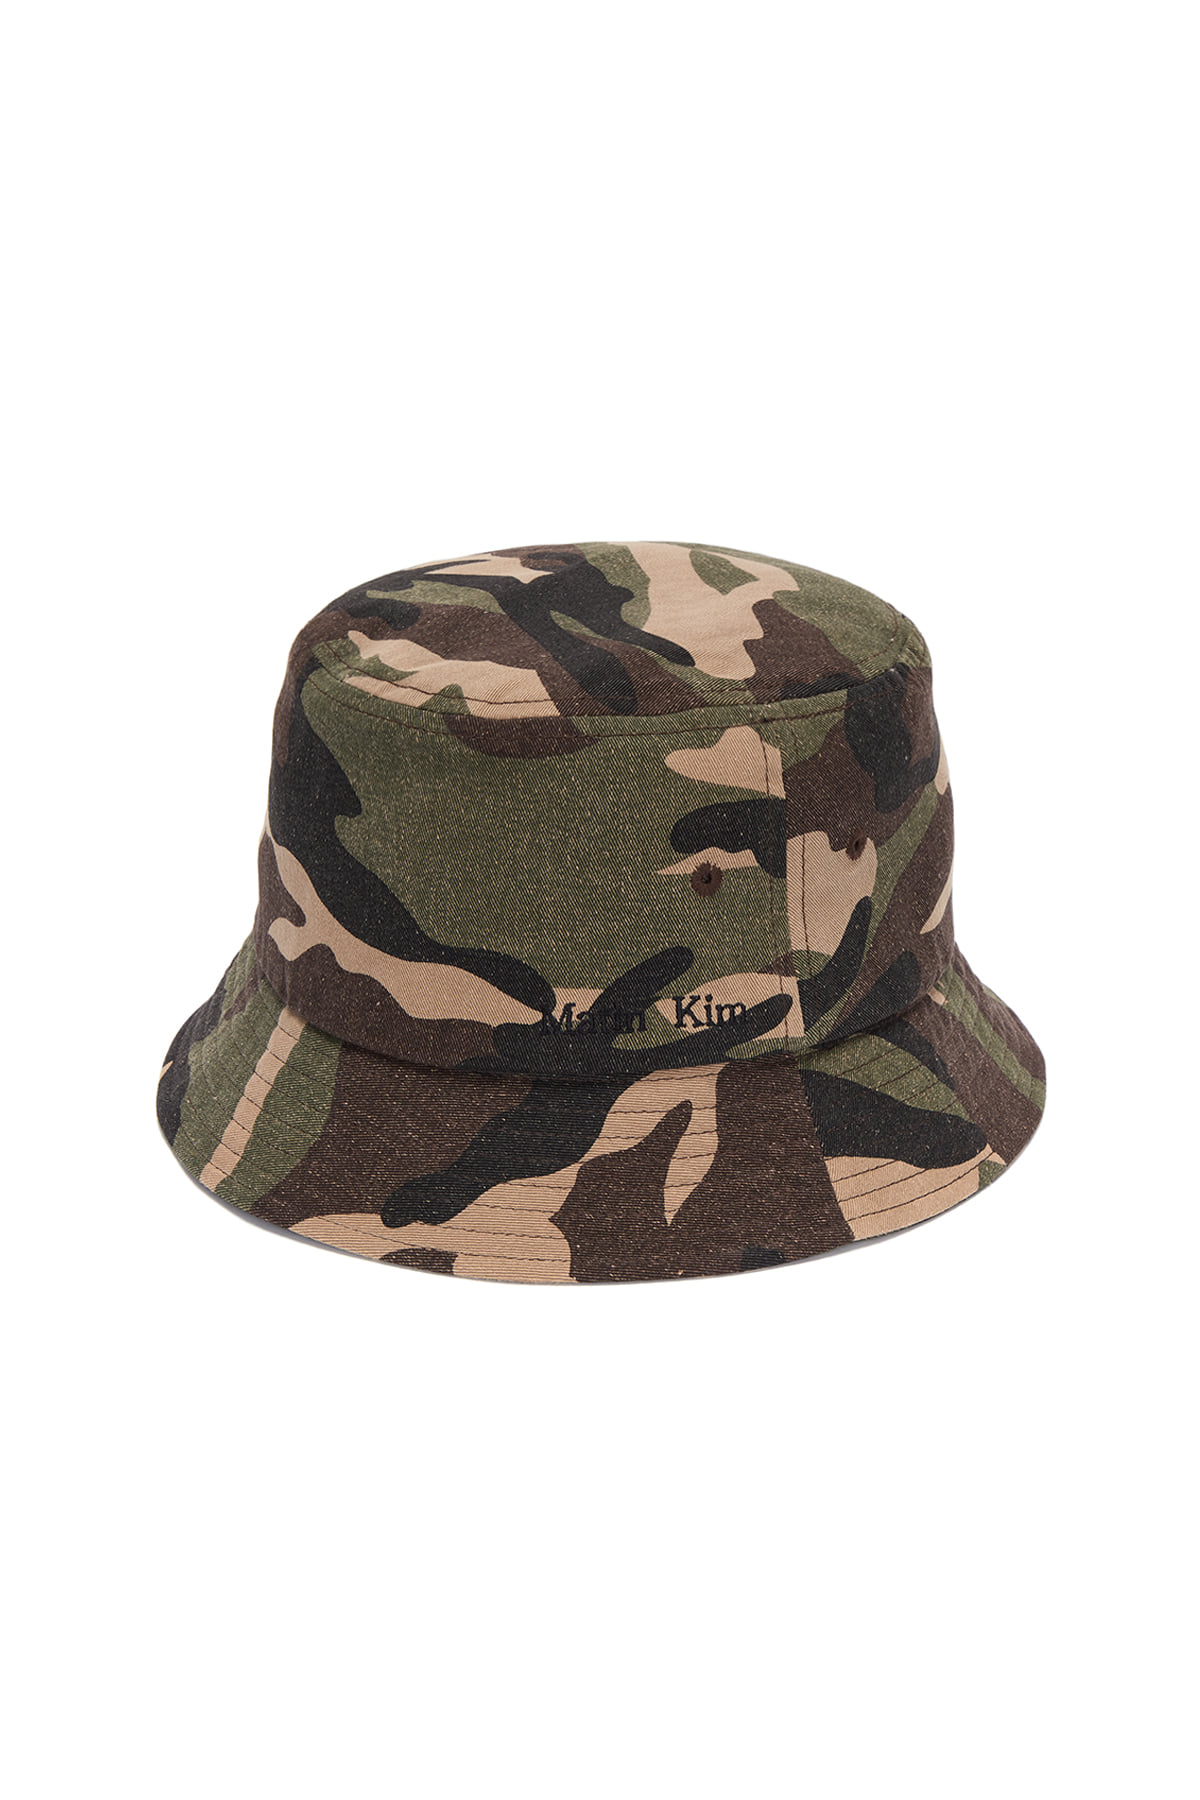 CAMOUFLAGE BUCKET HAT IN MIX